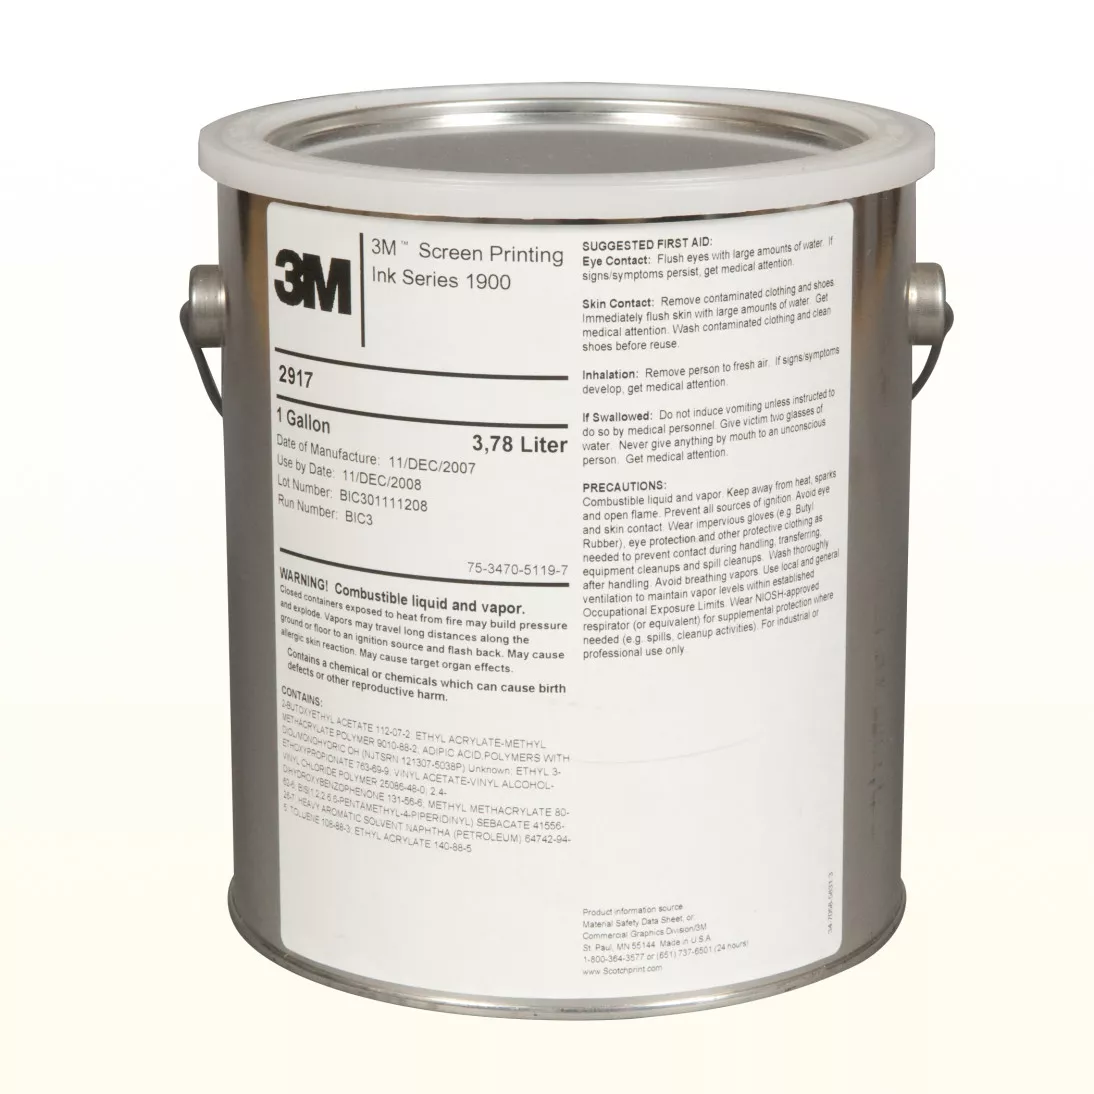 3M™ Scotchlite™ Transparent Screen Printing Ink 2917, Brown, 1 Gallon
Container